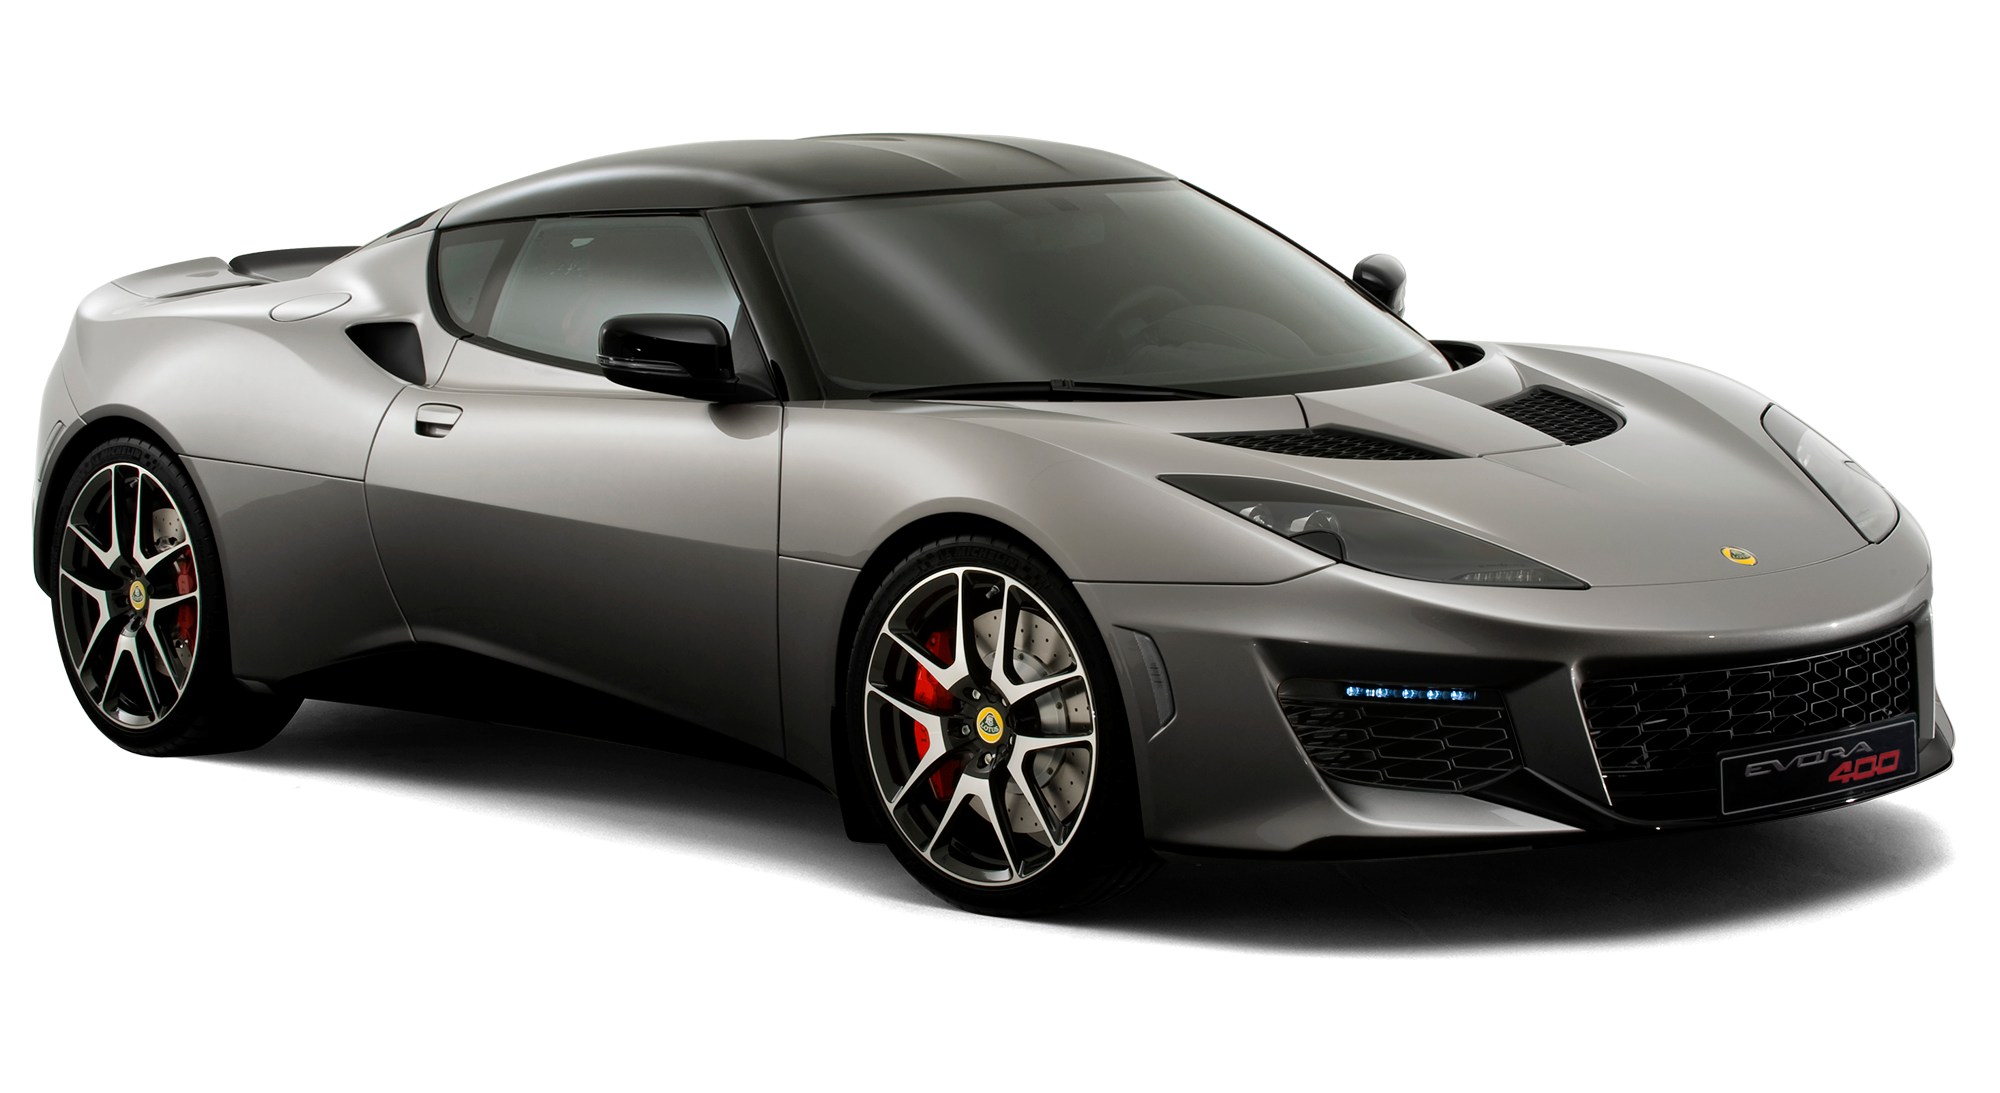 Lotus Evora exterior - Front Right Angled